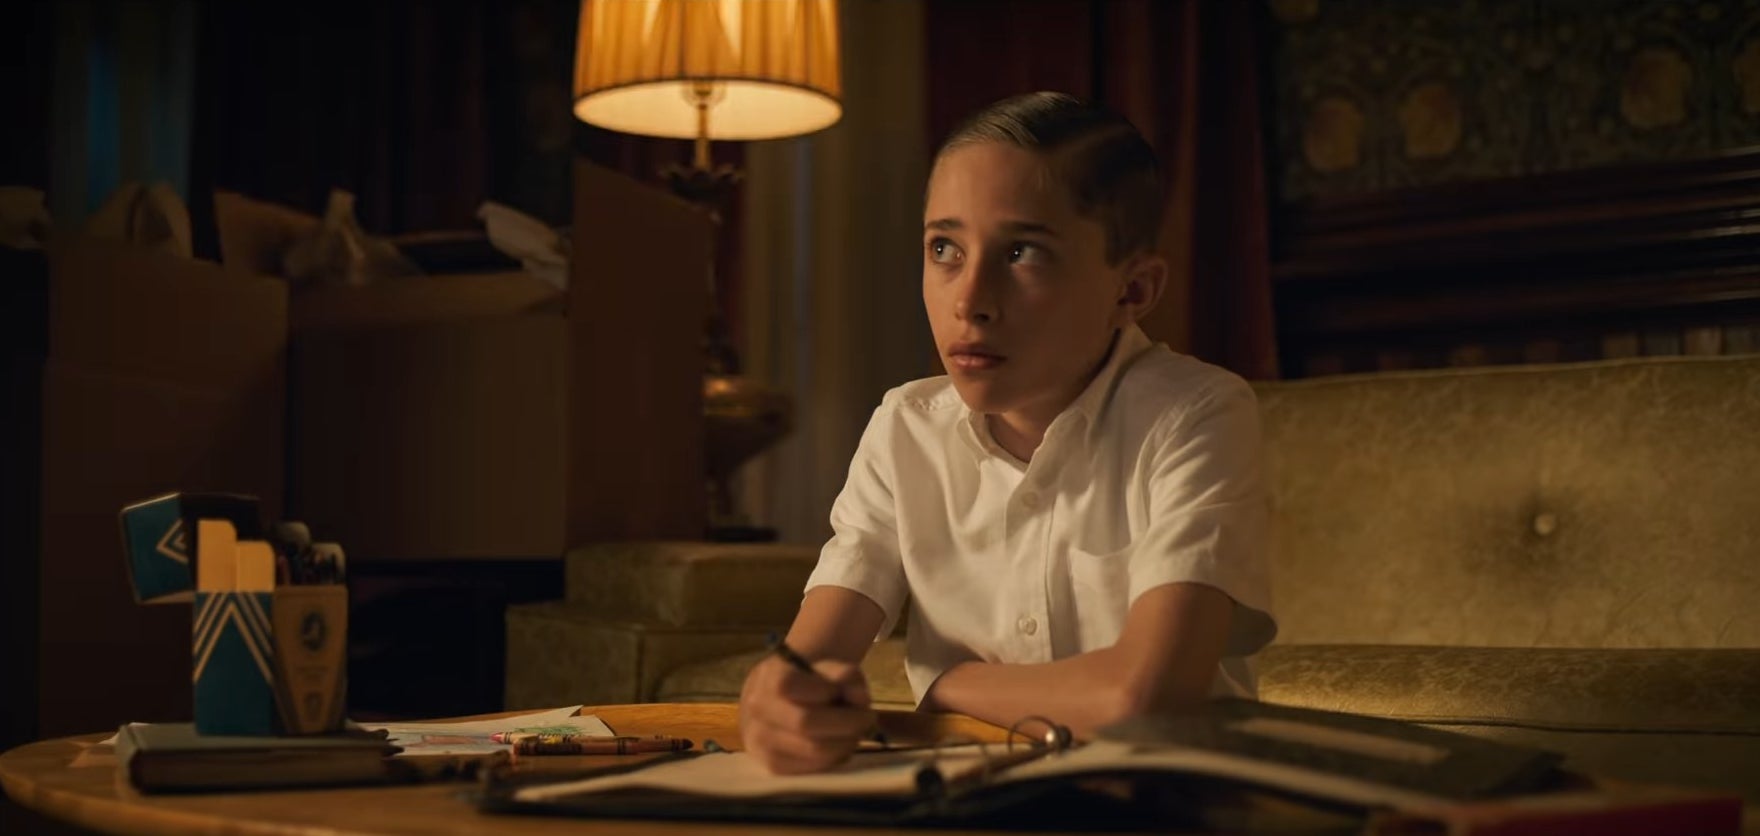 A young Henry Creel coloring in his binder in &quot;Stranger Things&quot;